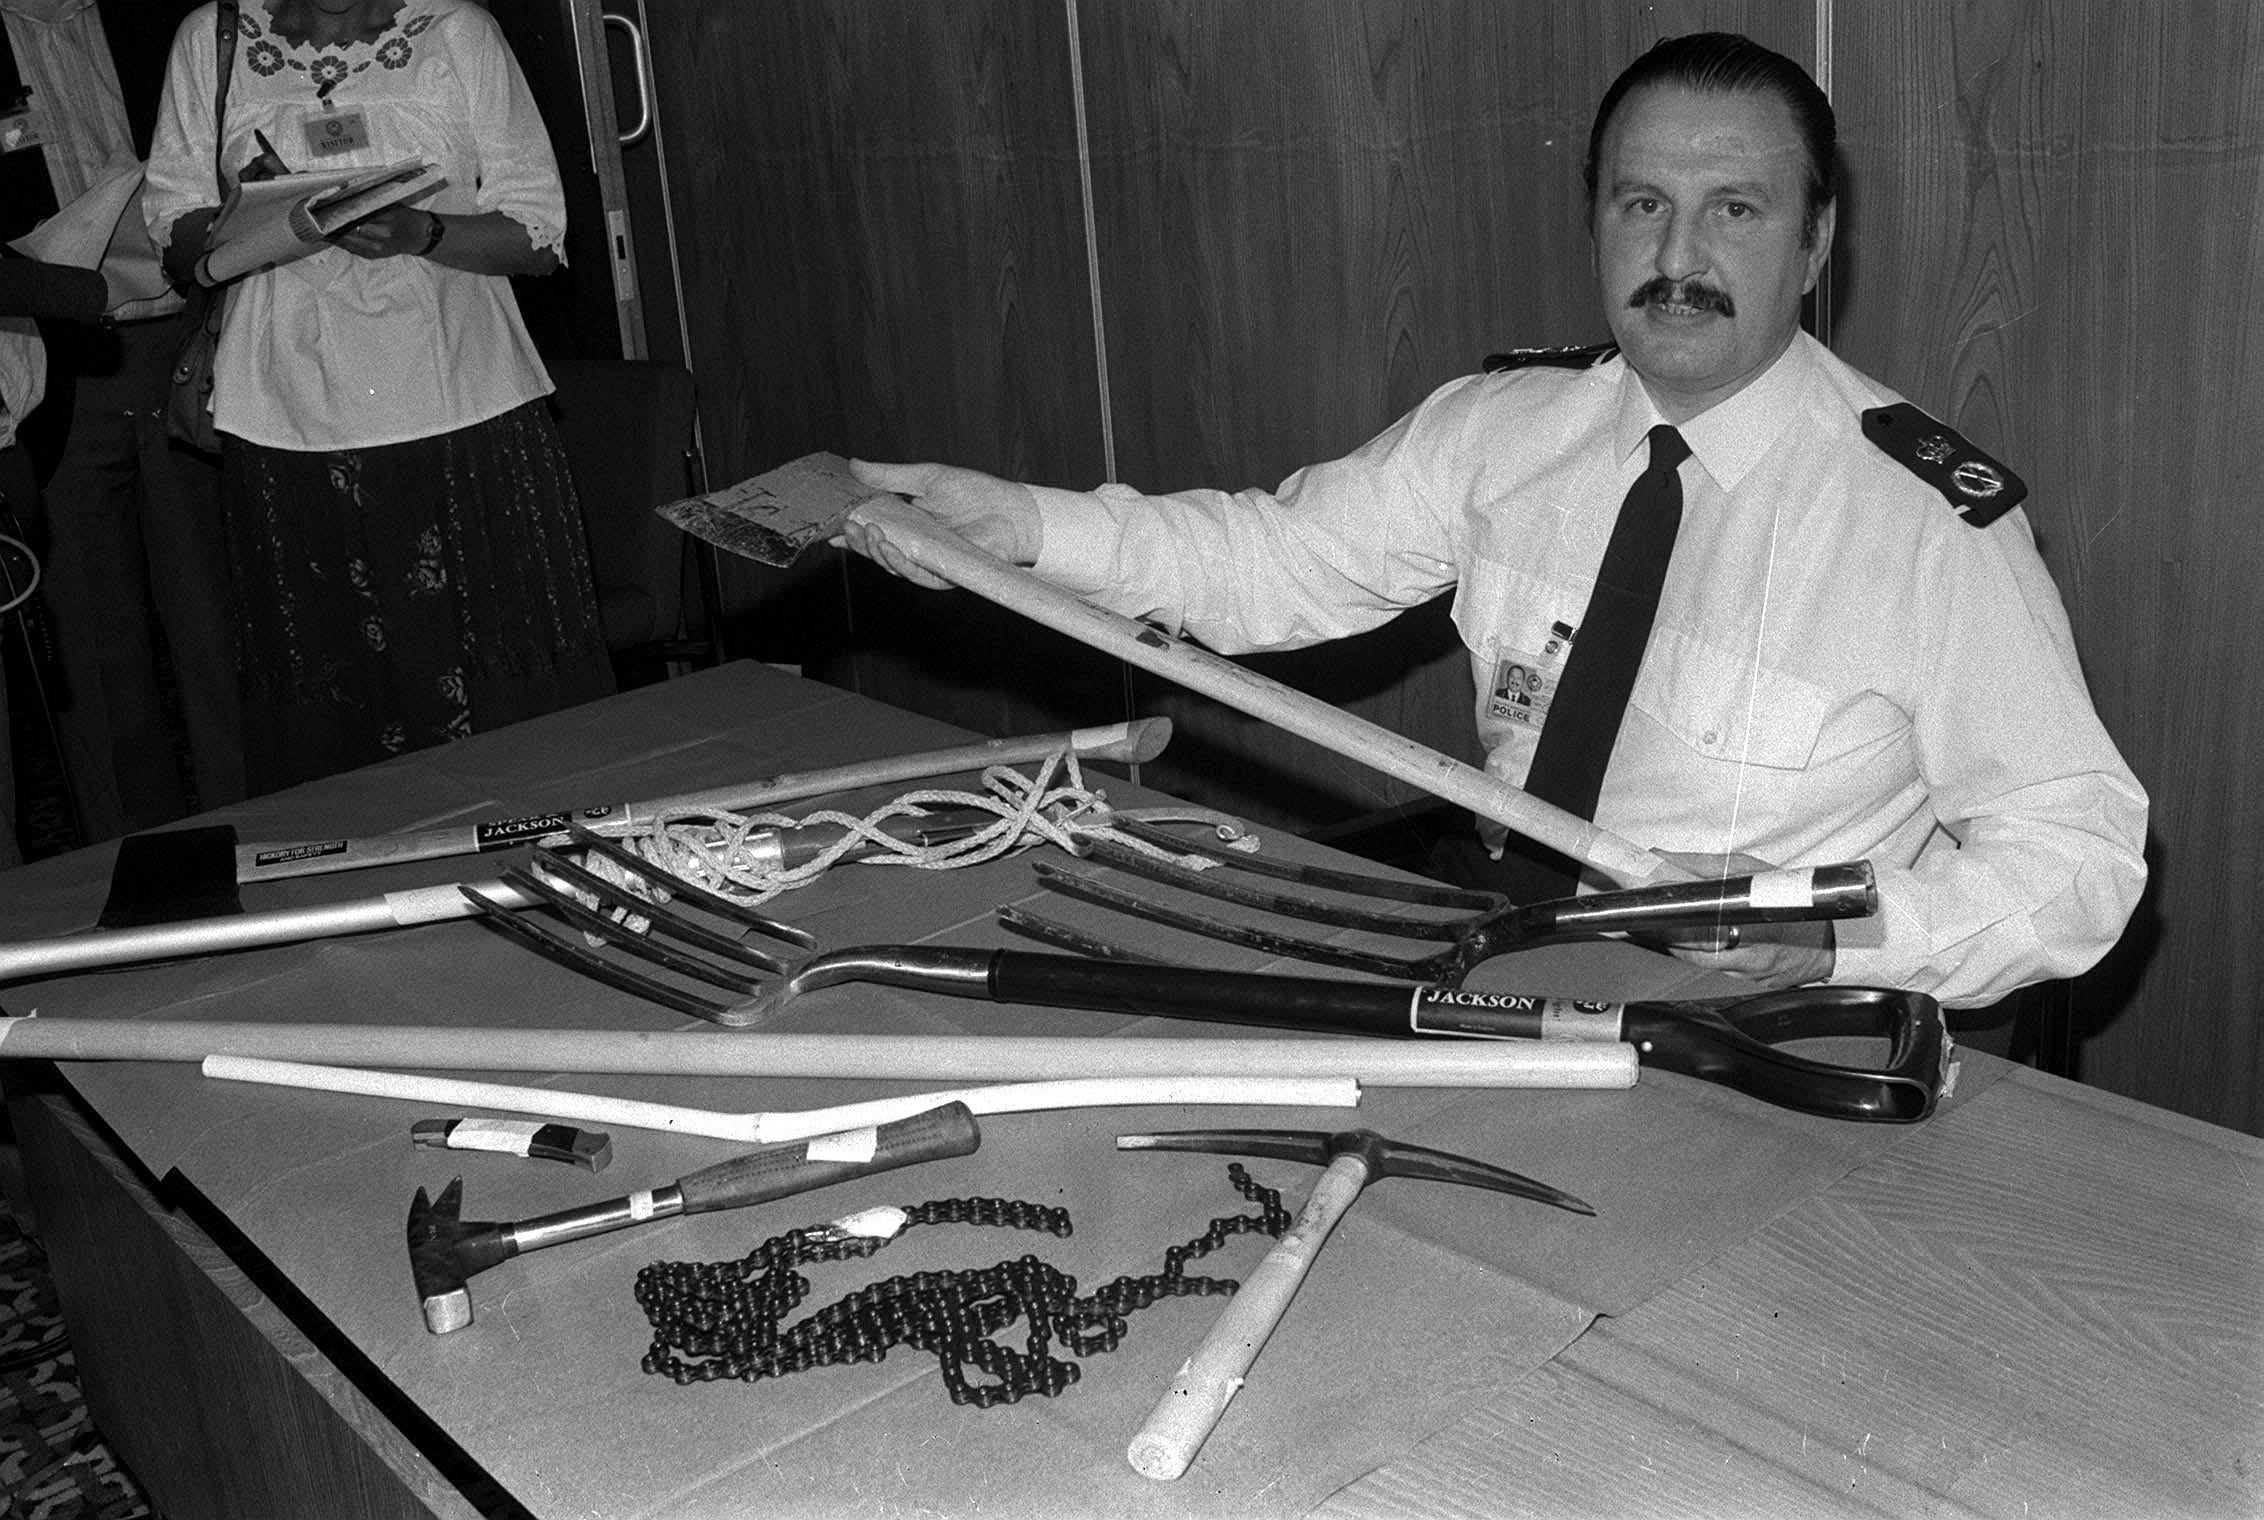 Then chief constable of the Greater Manchester Police, James Anderton, displaying some of the items that were looted and used by rioters as weapons during the riots in the Moss Side District of Manchester (Archive/PA)